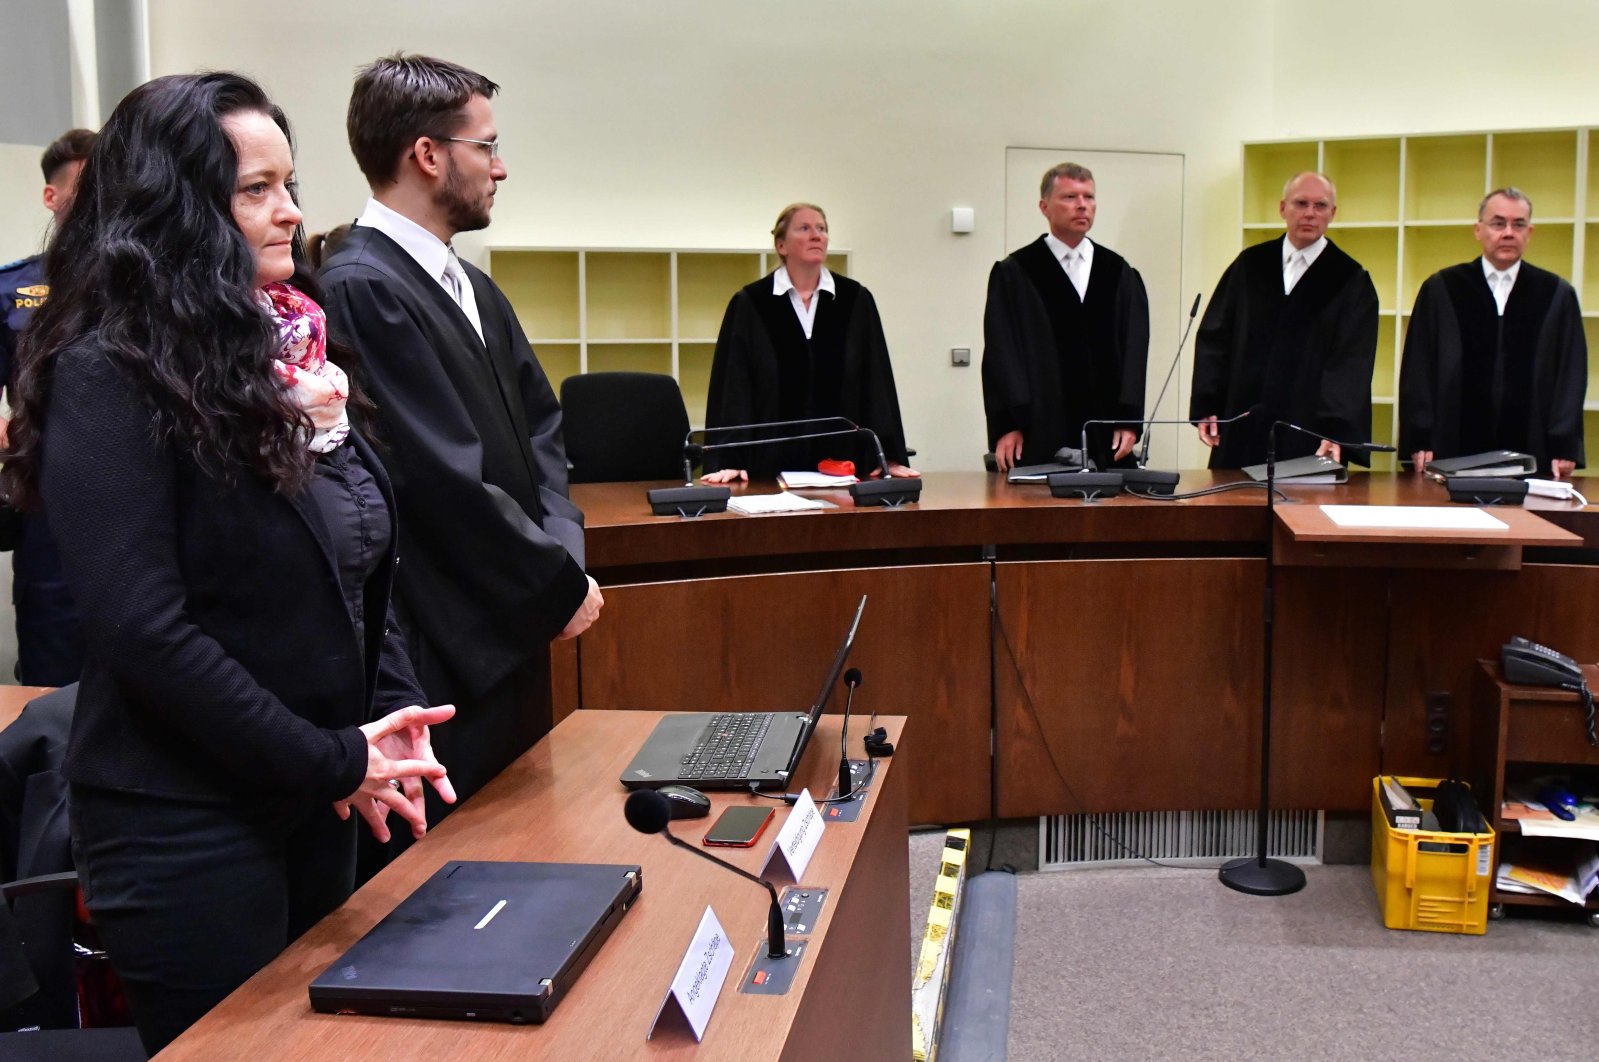 (L-R) Beate Zschaepe, her lawyer Mathias Grasel, judges Gabriele Feistkorn, Peter Lang, Manfred Goetzl and Konstantin Kuchenbauer stand before the proclamation of sentence in the trial against Beate Zschaepe, the only surviving member of the neo-Nazi cell National Socialist Underground (NSU) behind a string of racist murders, in Munich, Germany, July 11, 2018. (AFP Photo)